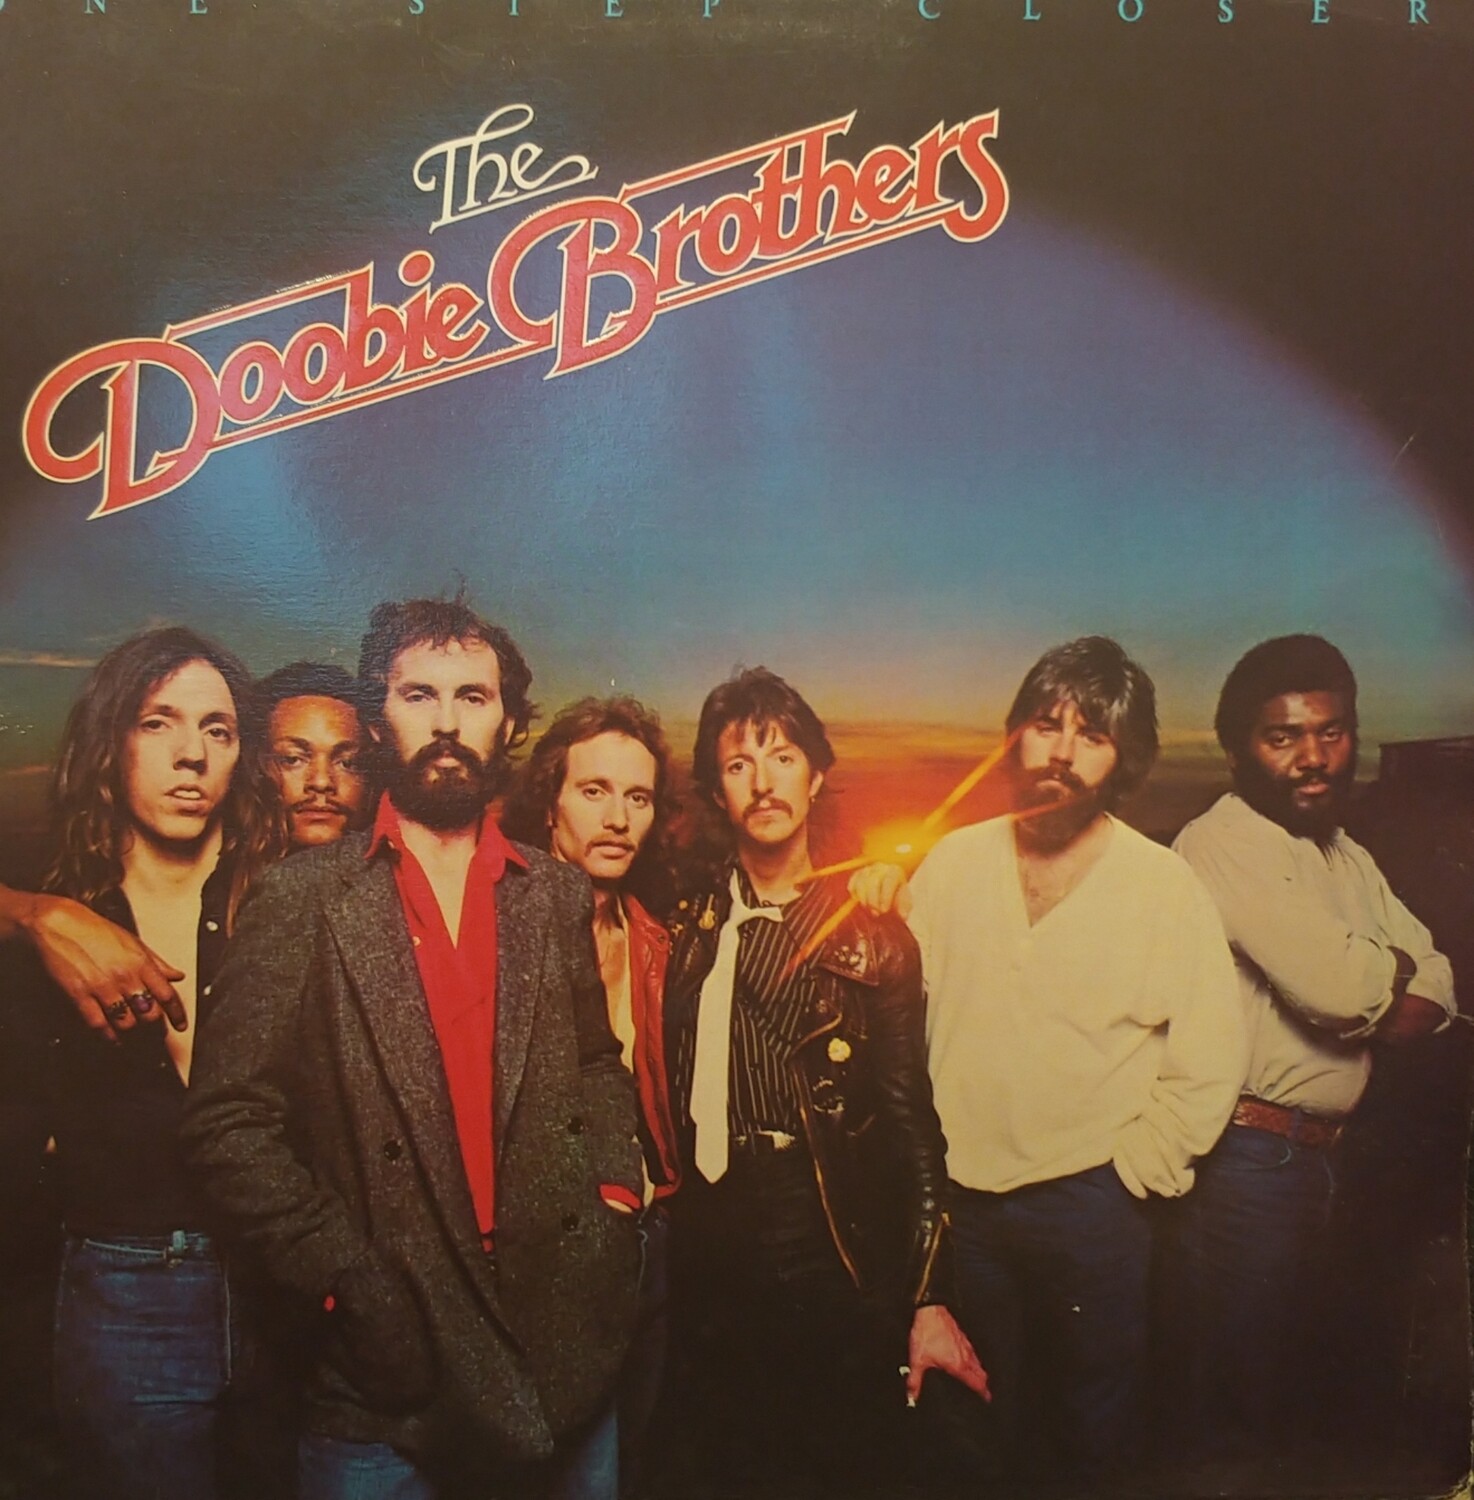 The Doobie Brothers - One step closer